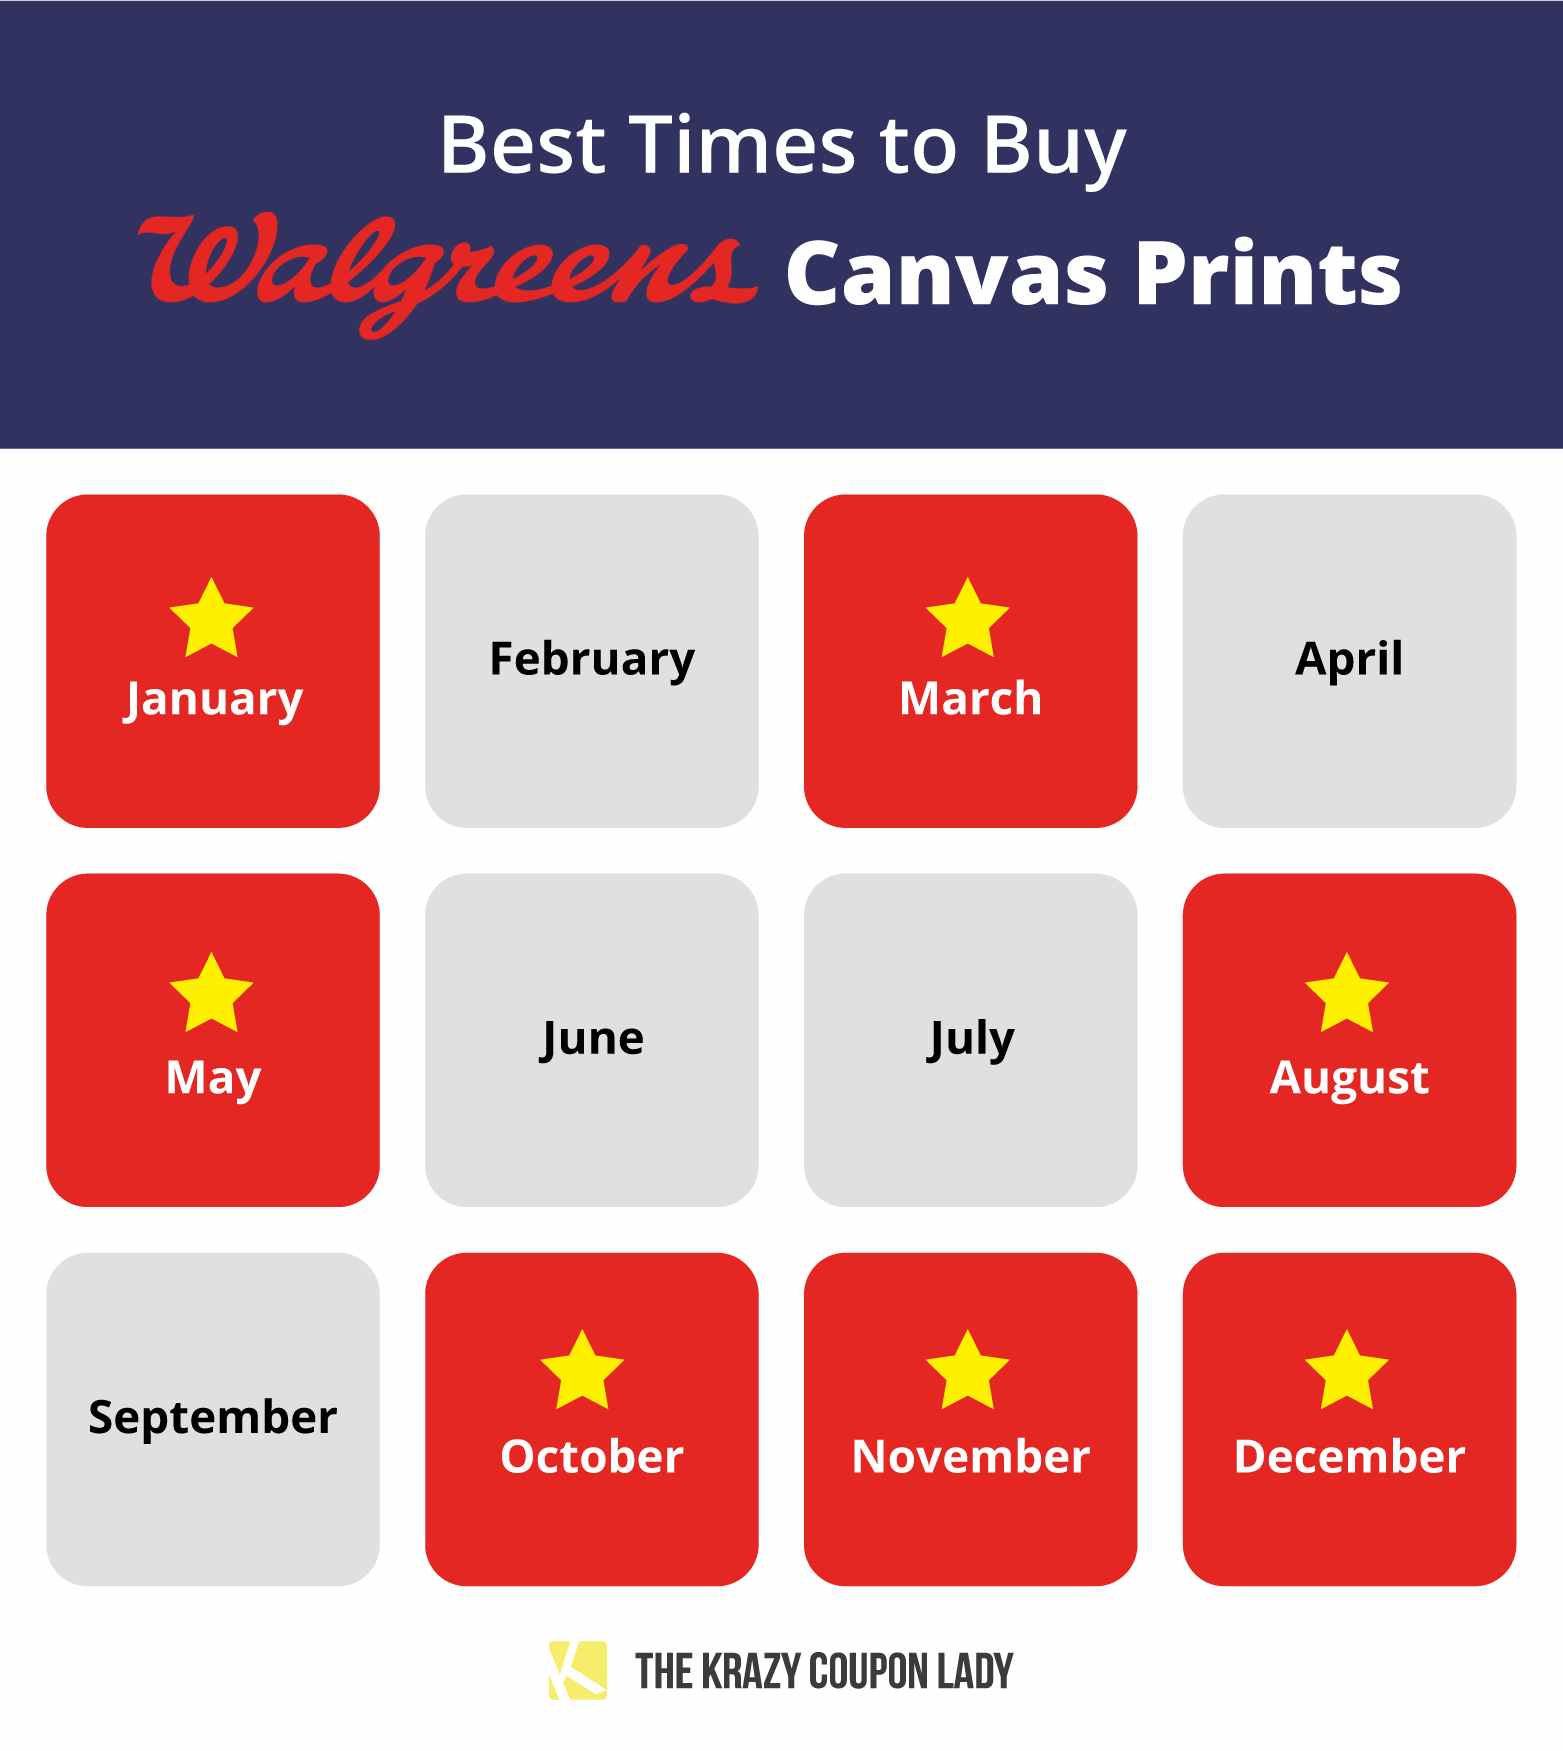 A graphic showing the best months to buy Walgreens canvas prints